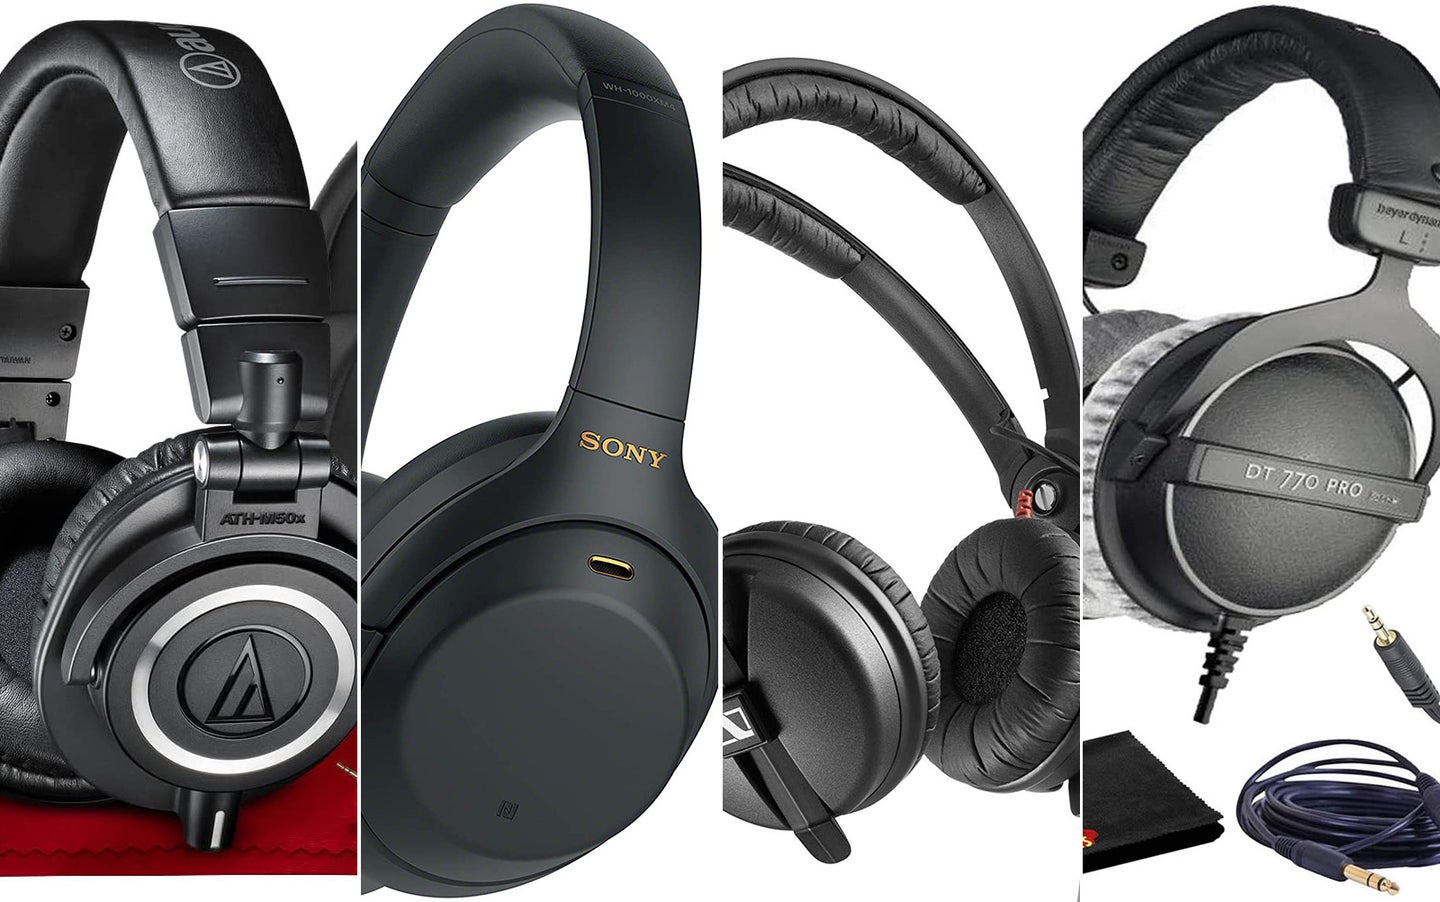 The best headphones for video editing